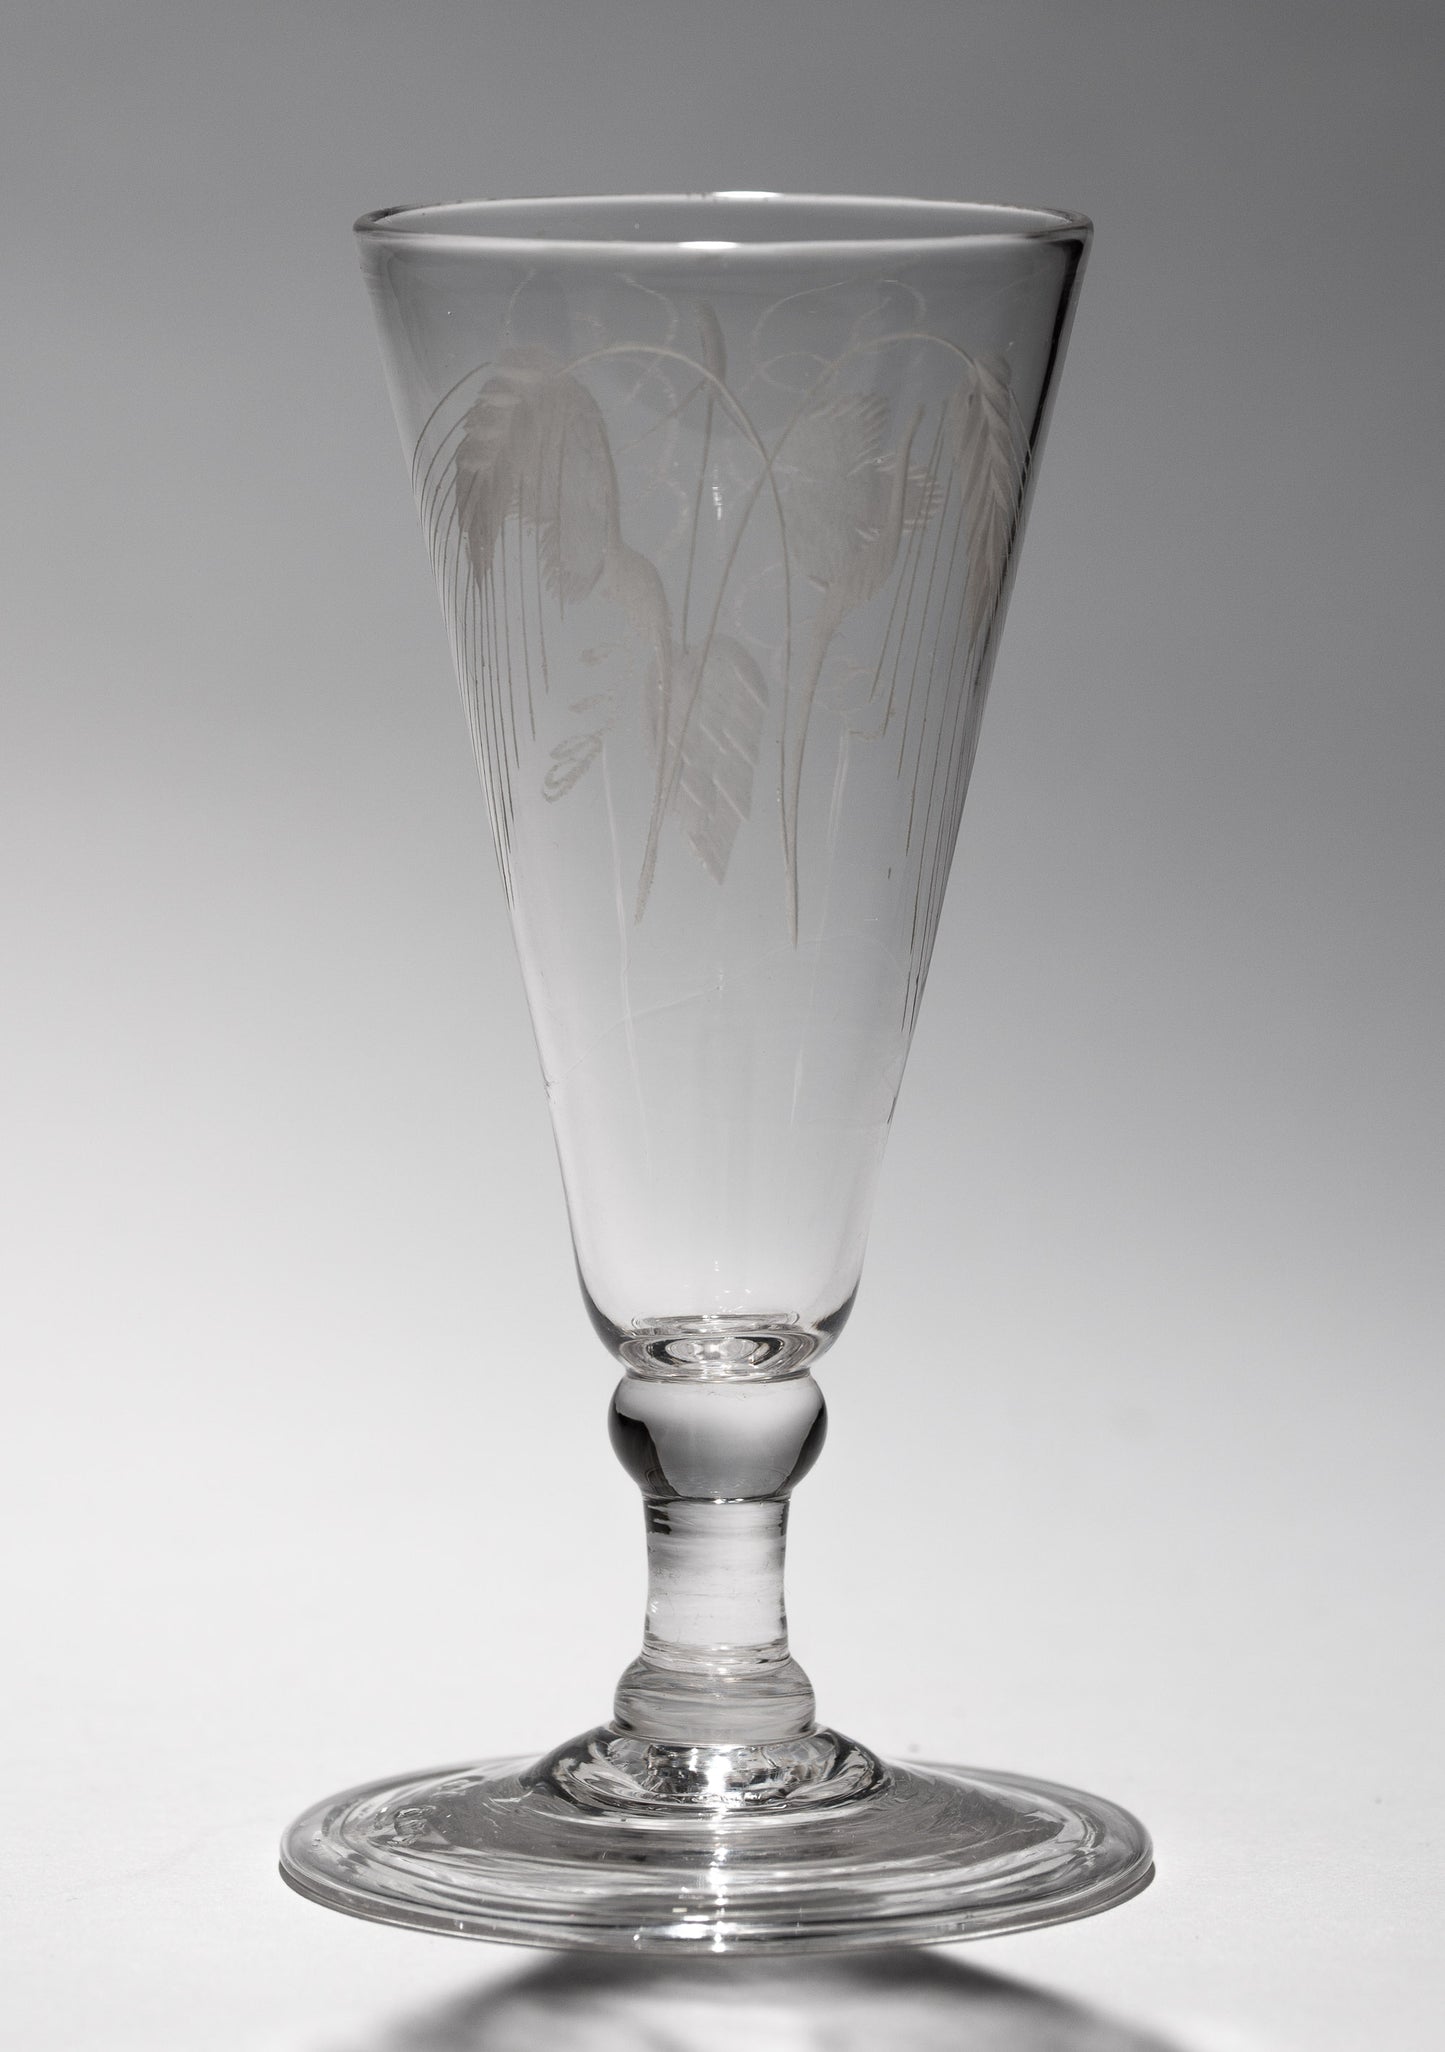 18th Century Georgian Dwarf Ale Glass with Etched Bowl & Folded Foot, English c1790 (3152)